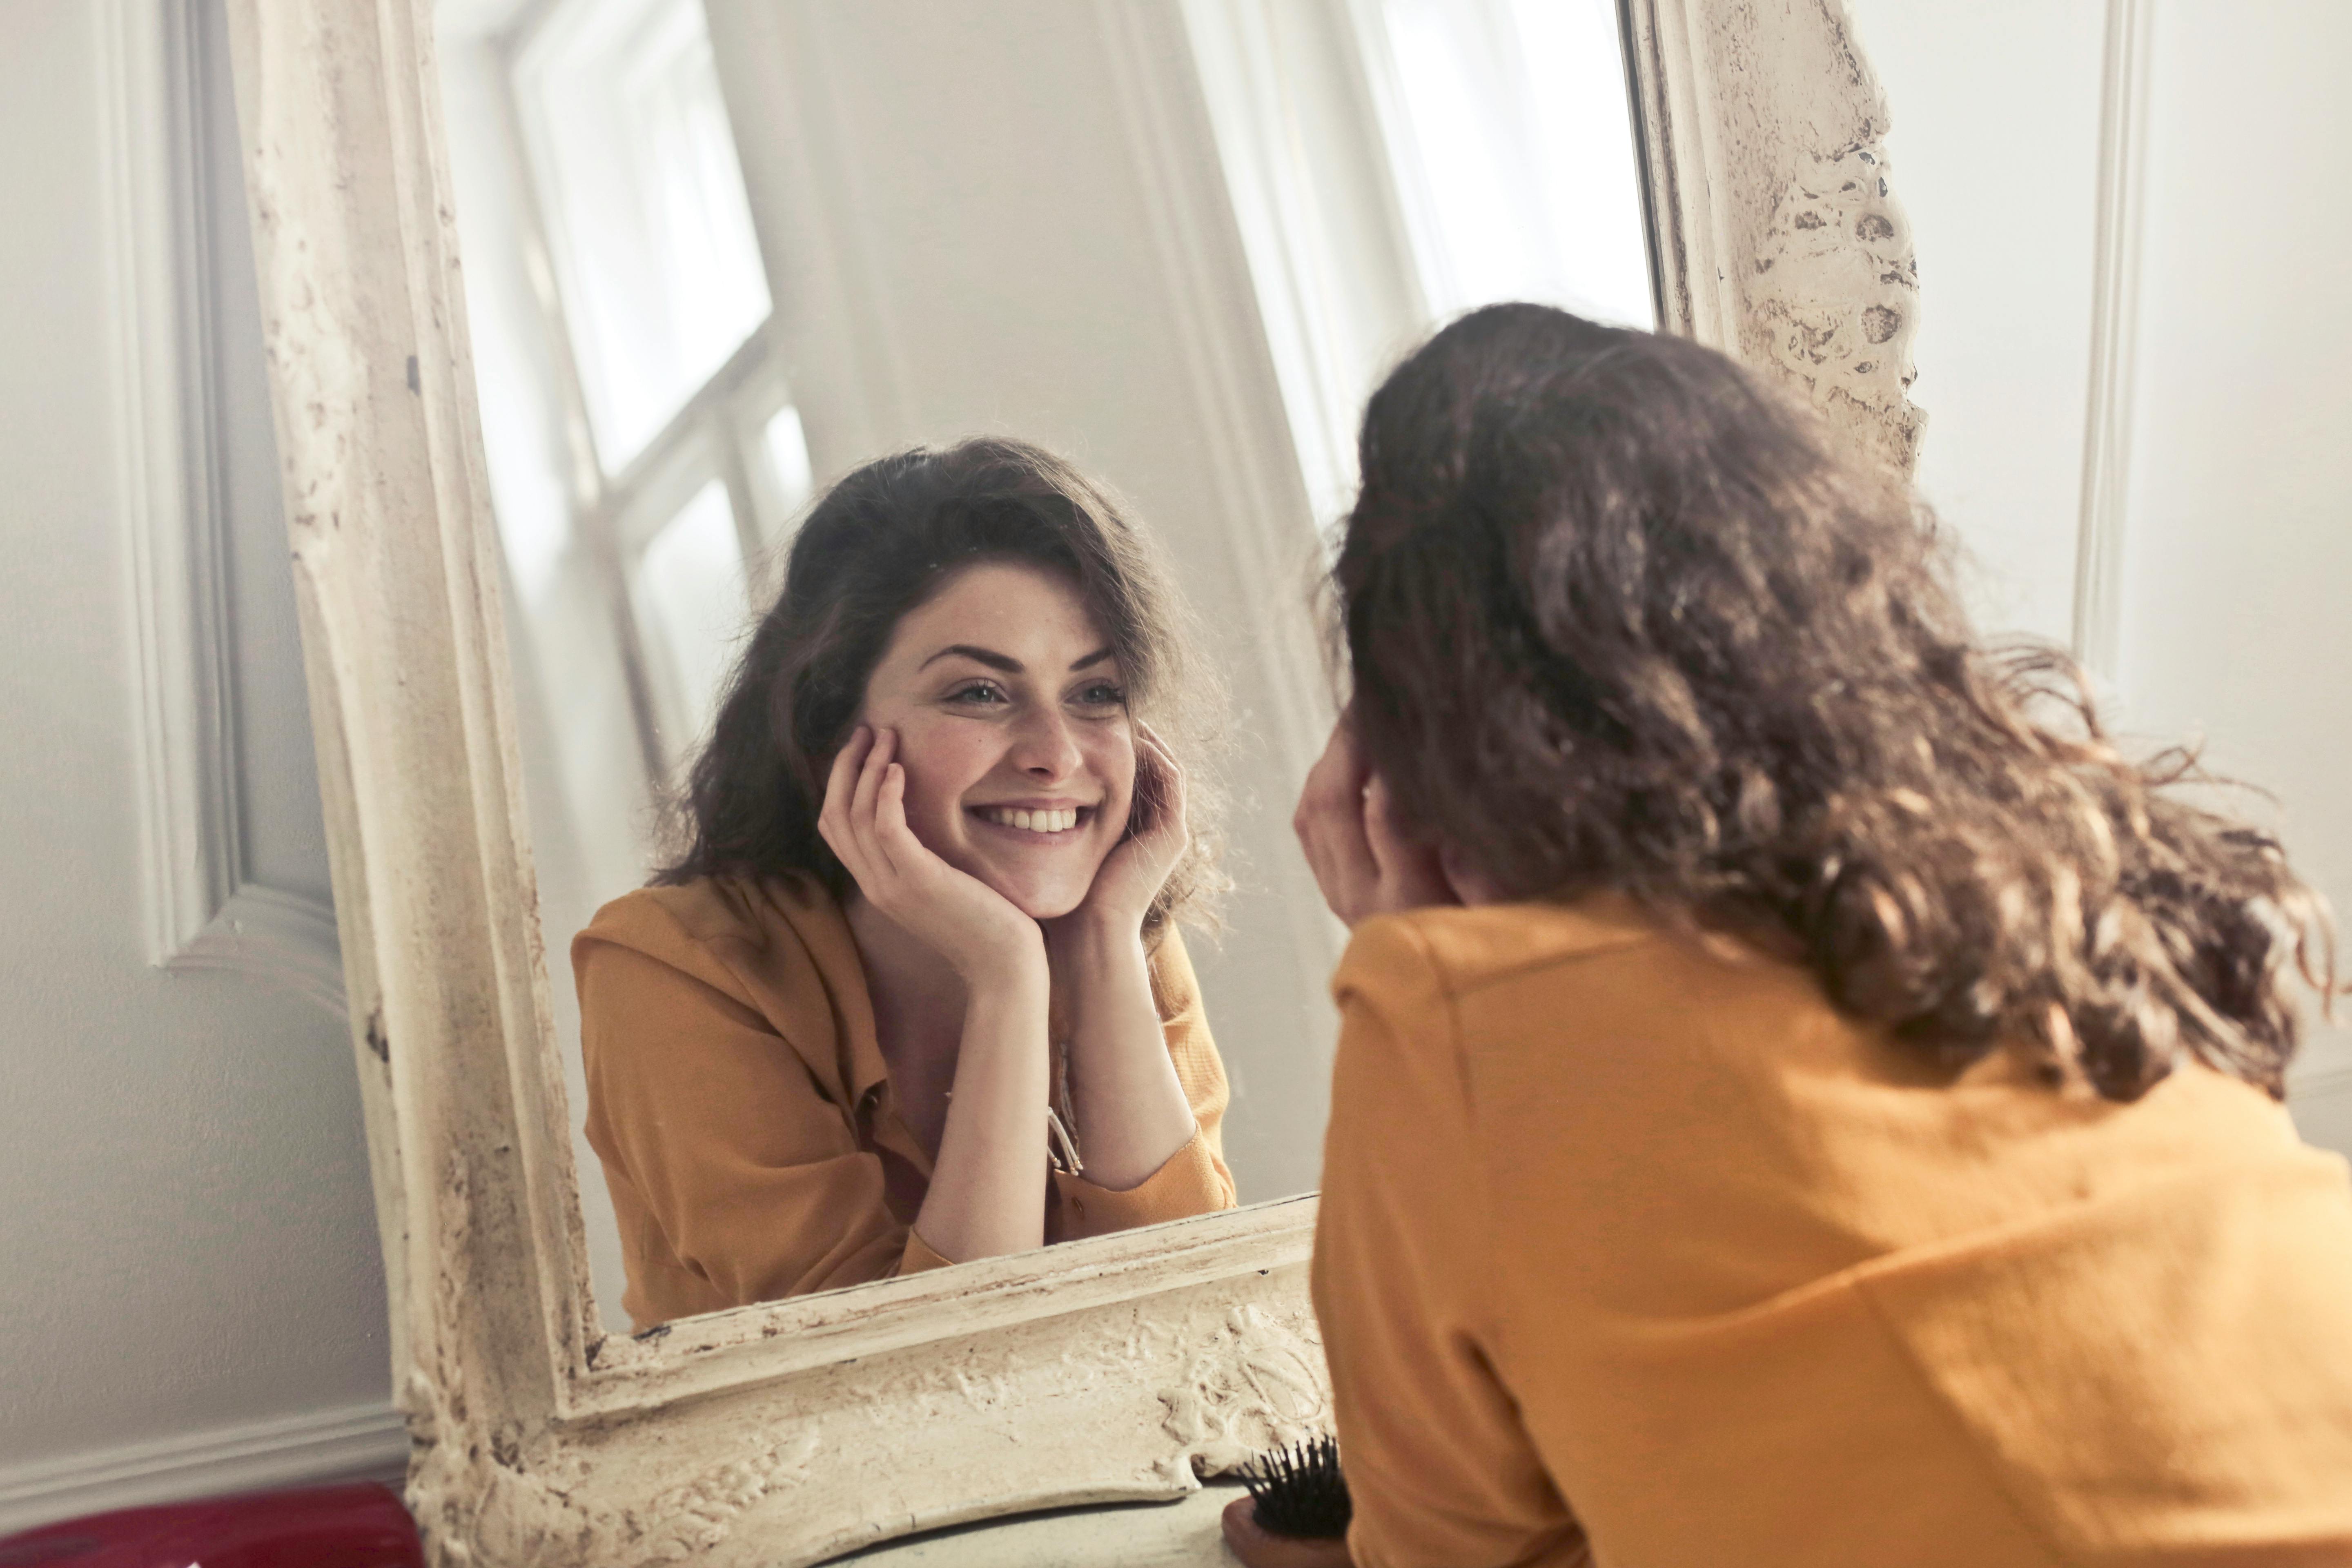 Woman smiling while looking in the mirror | Source: Pexels